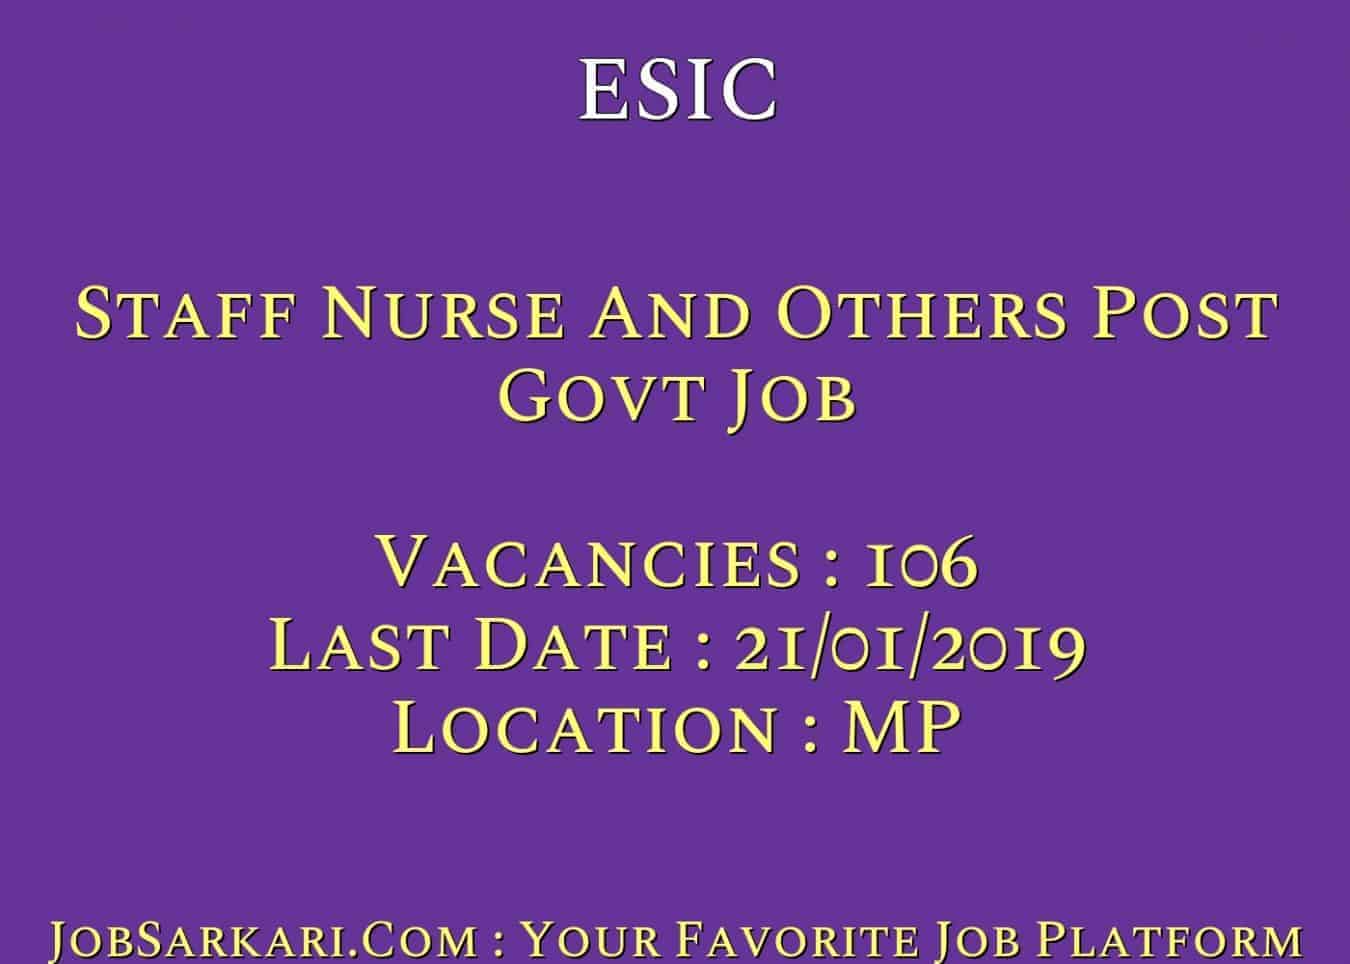 ESIC Recruitment 2018 For Staff Nurse And Others Post Govt Job